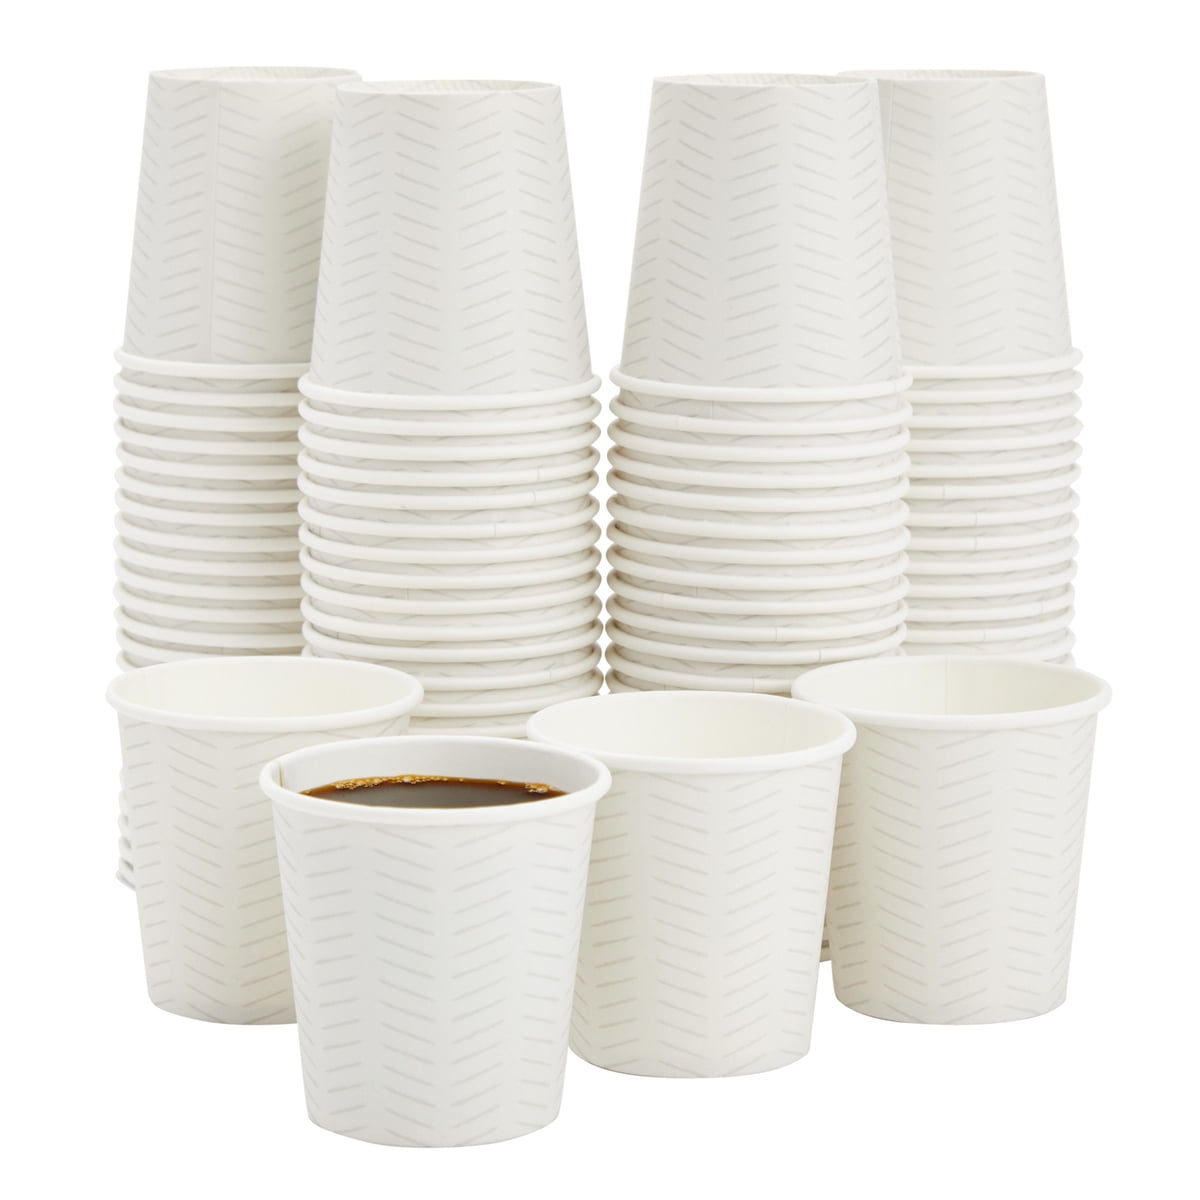 King Zak Disposable Espresso Paper Cup with Handle - 4 oz